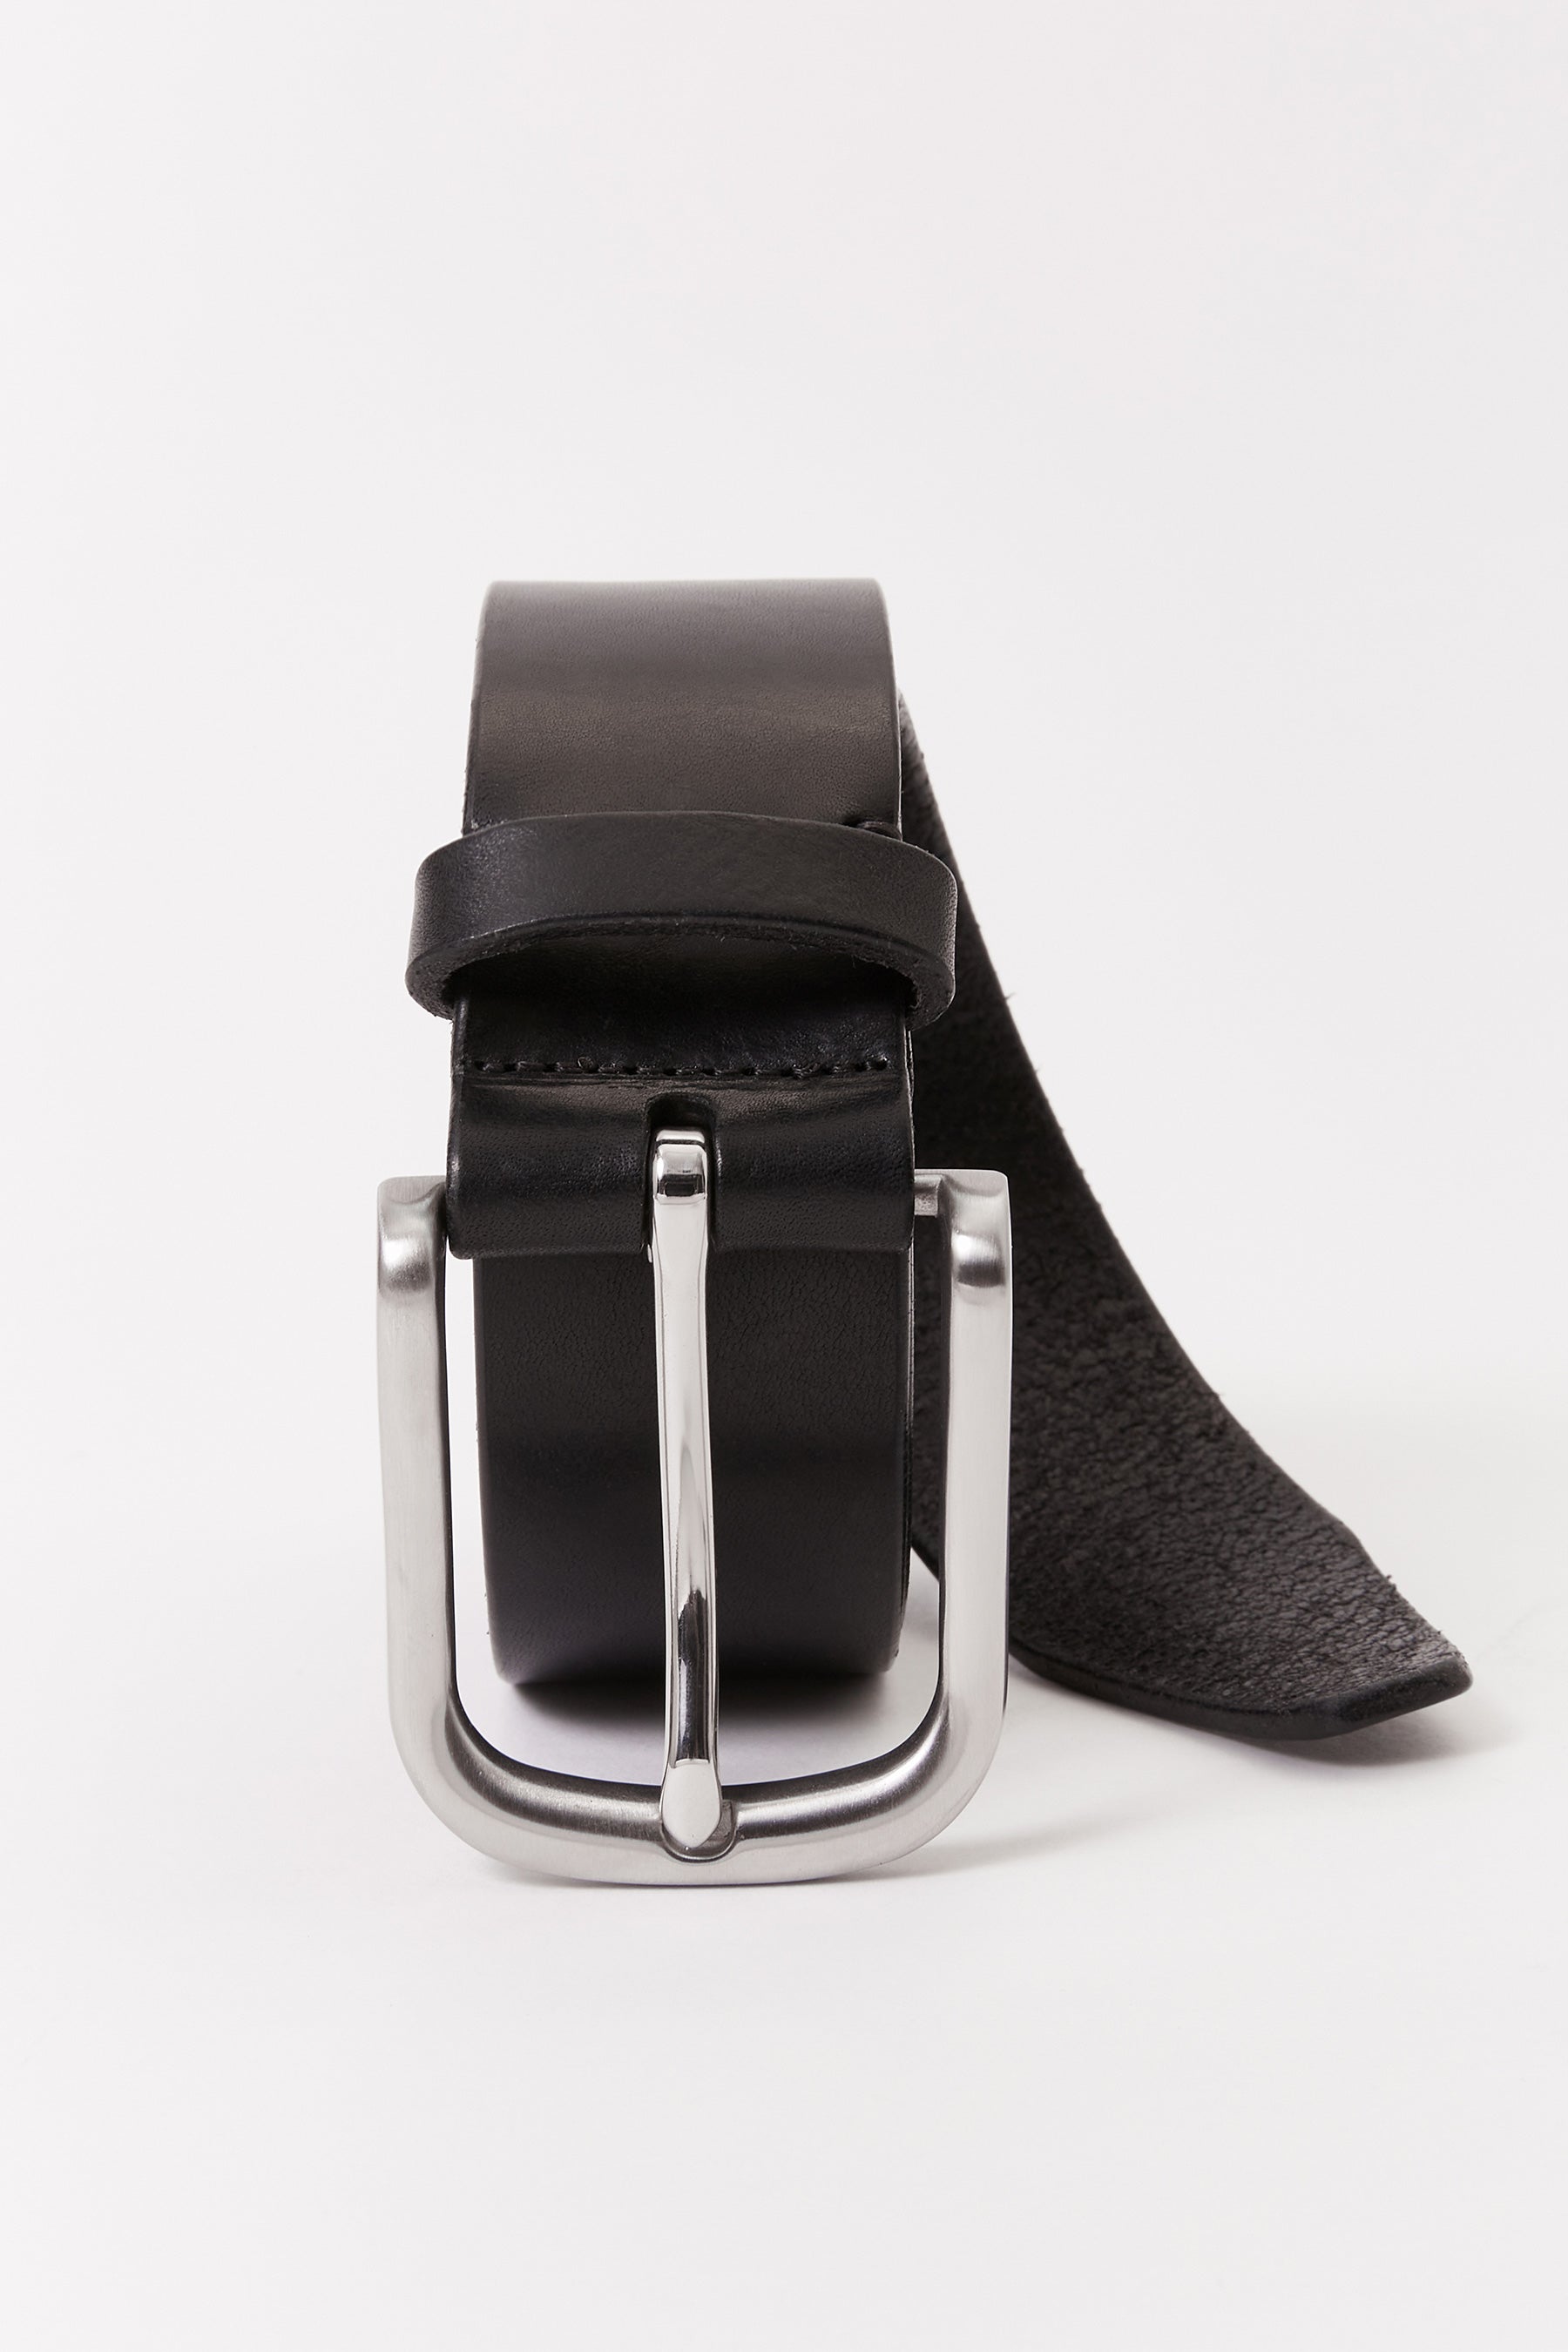 Black Calf Leather Belt with Studs